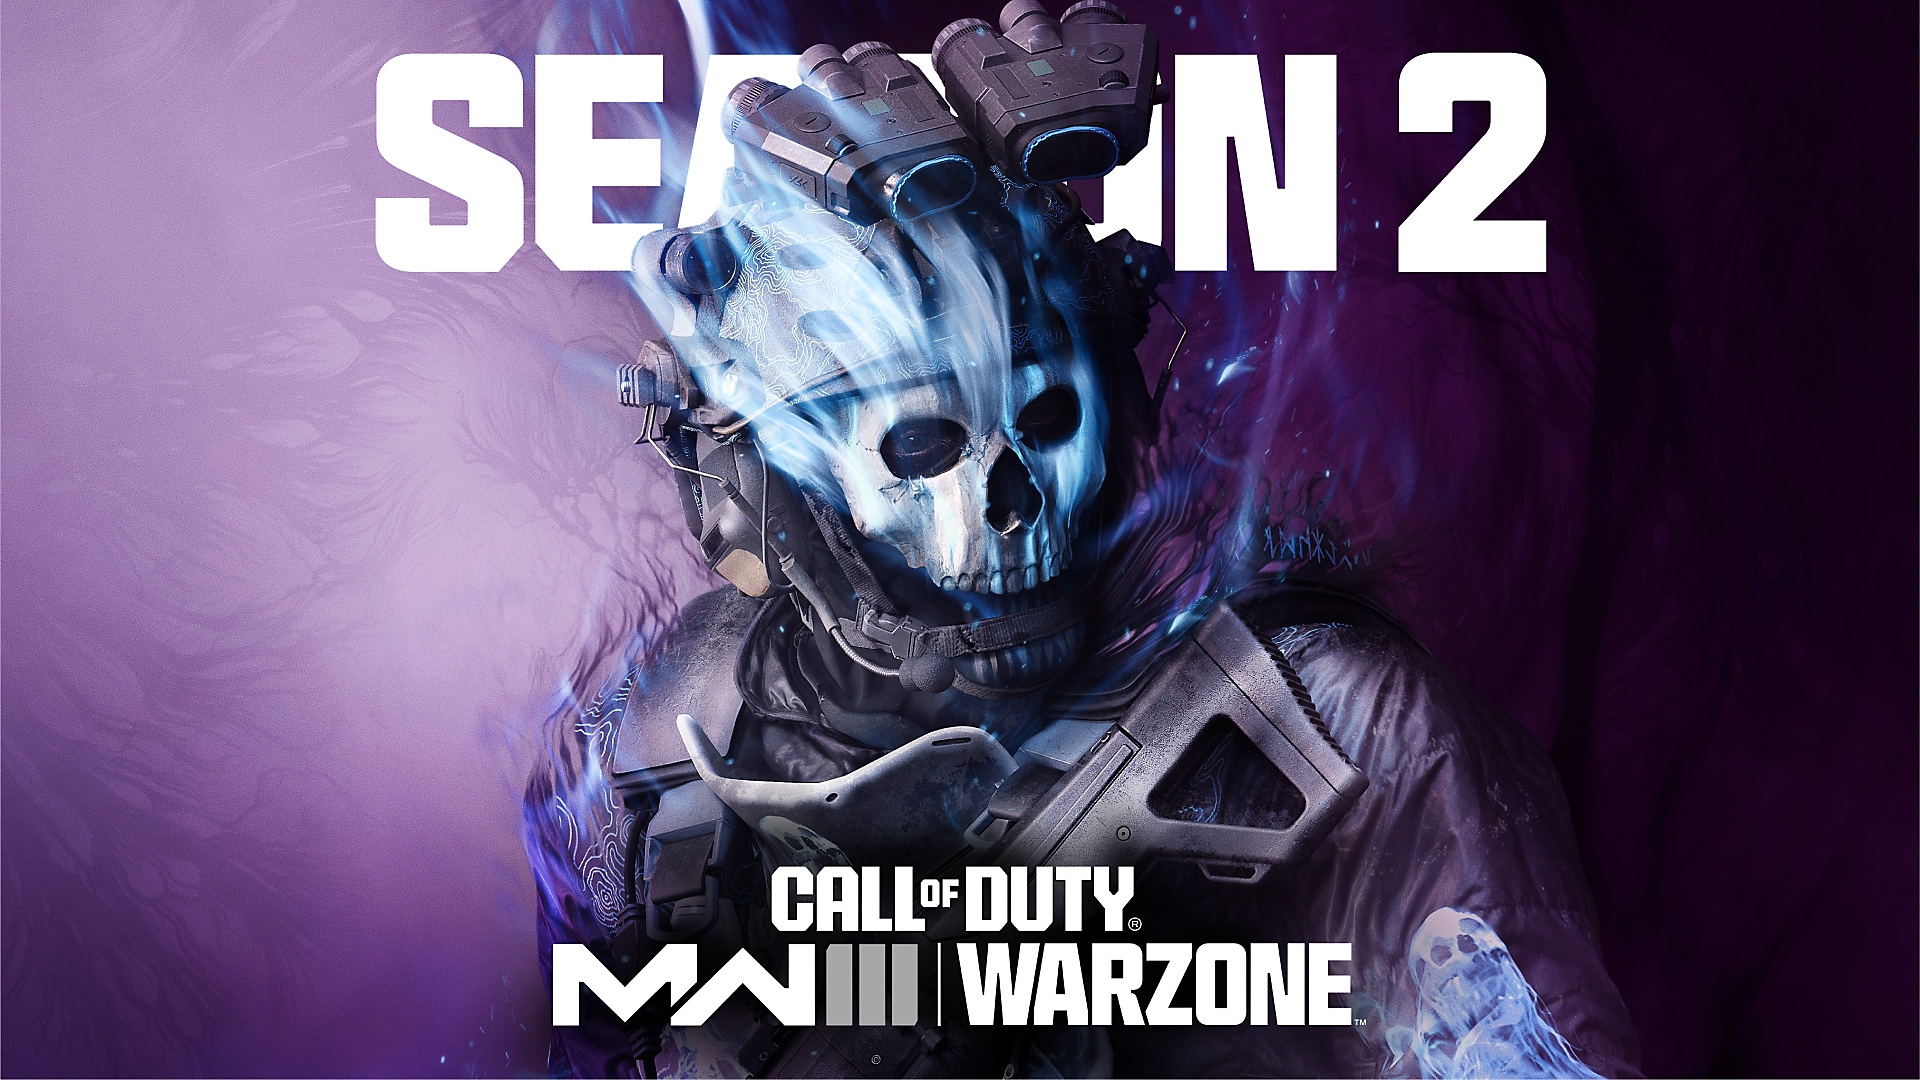 Call of Duty: Warzone - Season 2 Launch Trailer | PS5 & PS4 Games